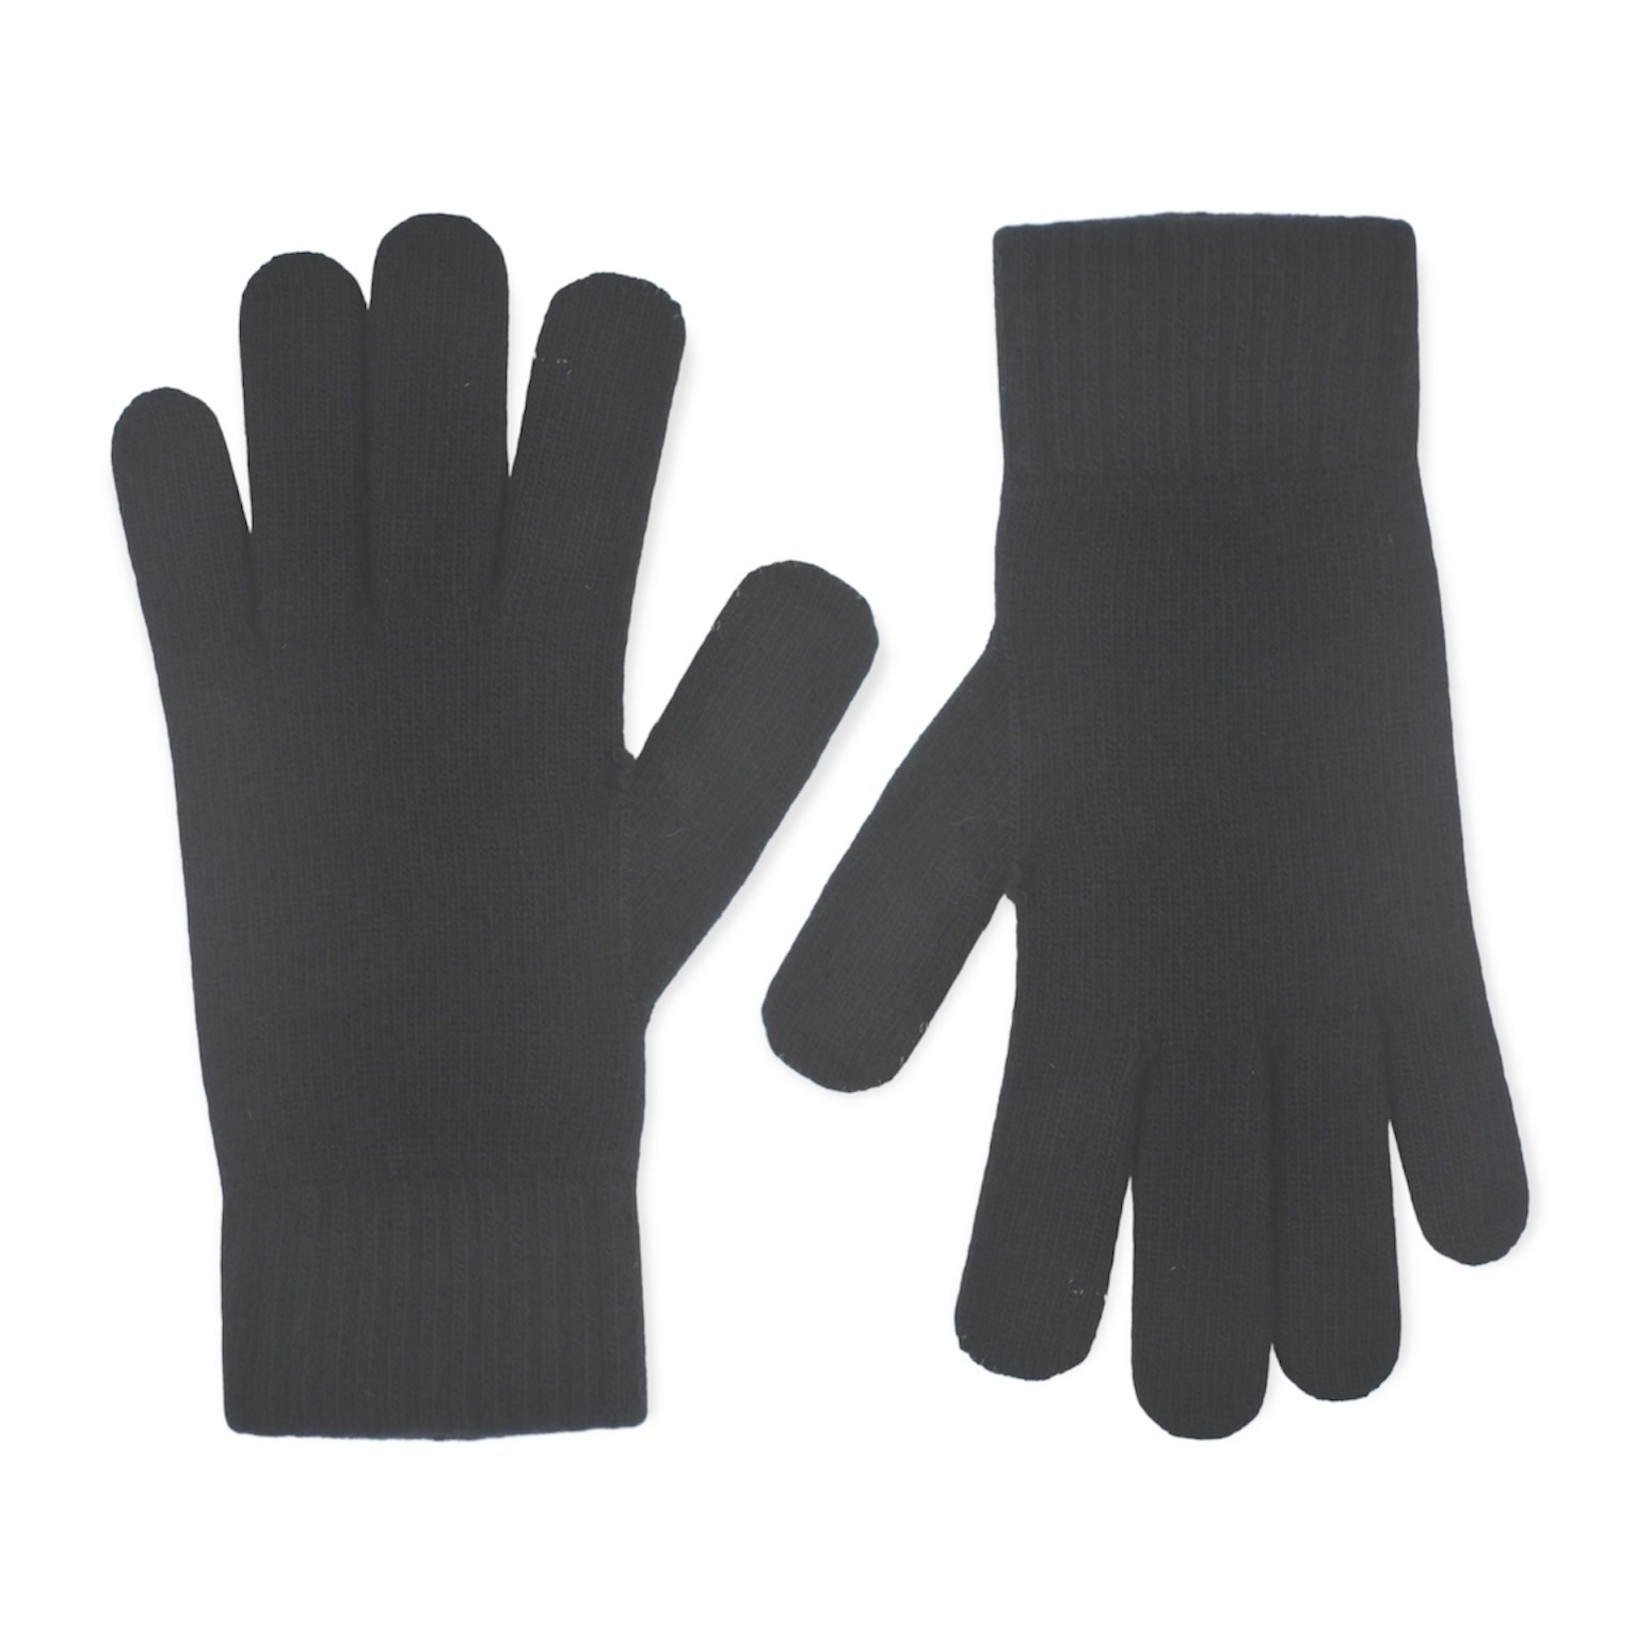 SANTACANA COMPLEMENTOS SI Ribbed cuff cashmere gloves